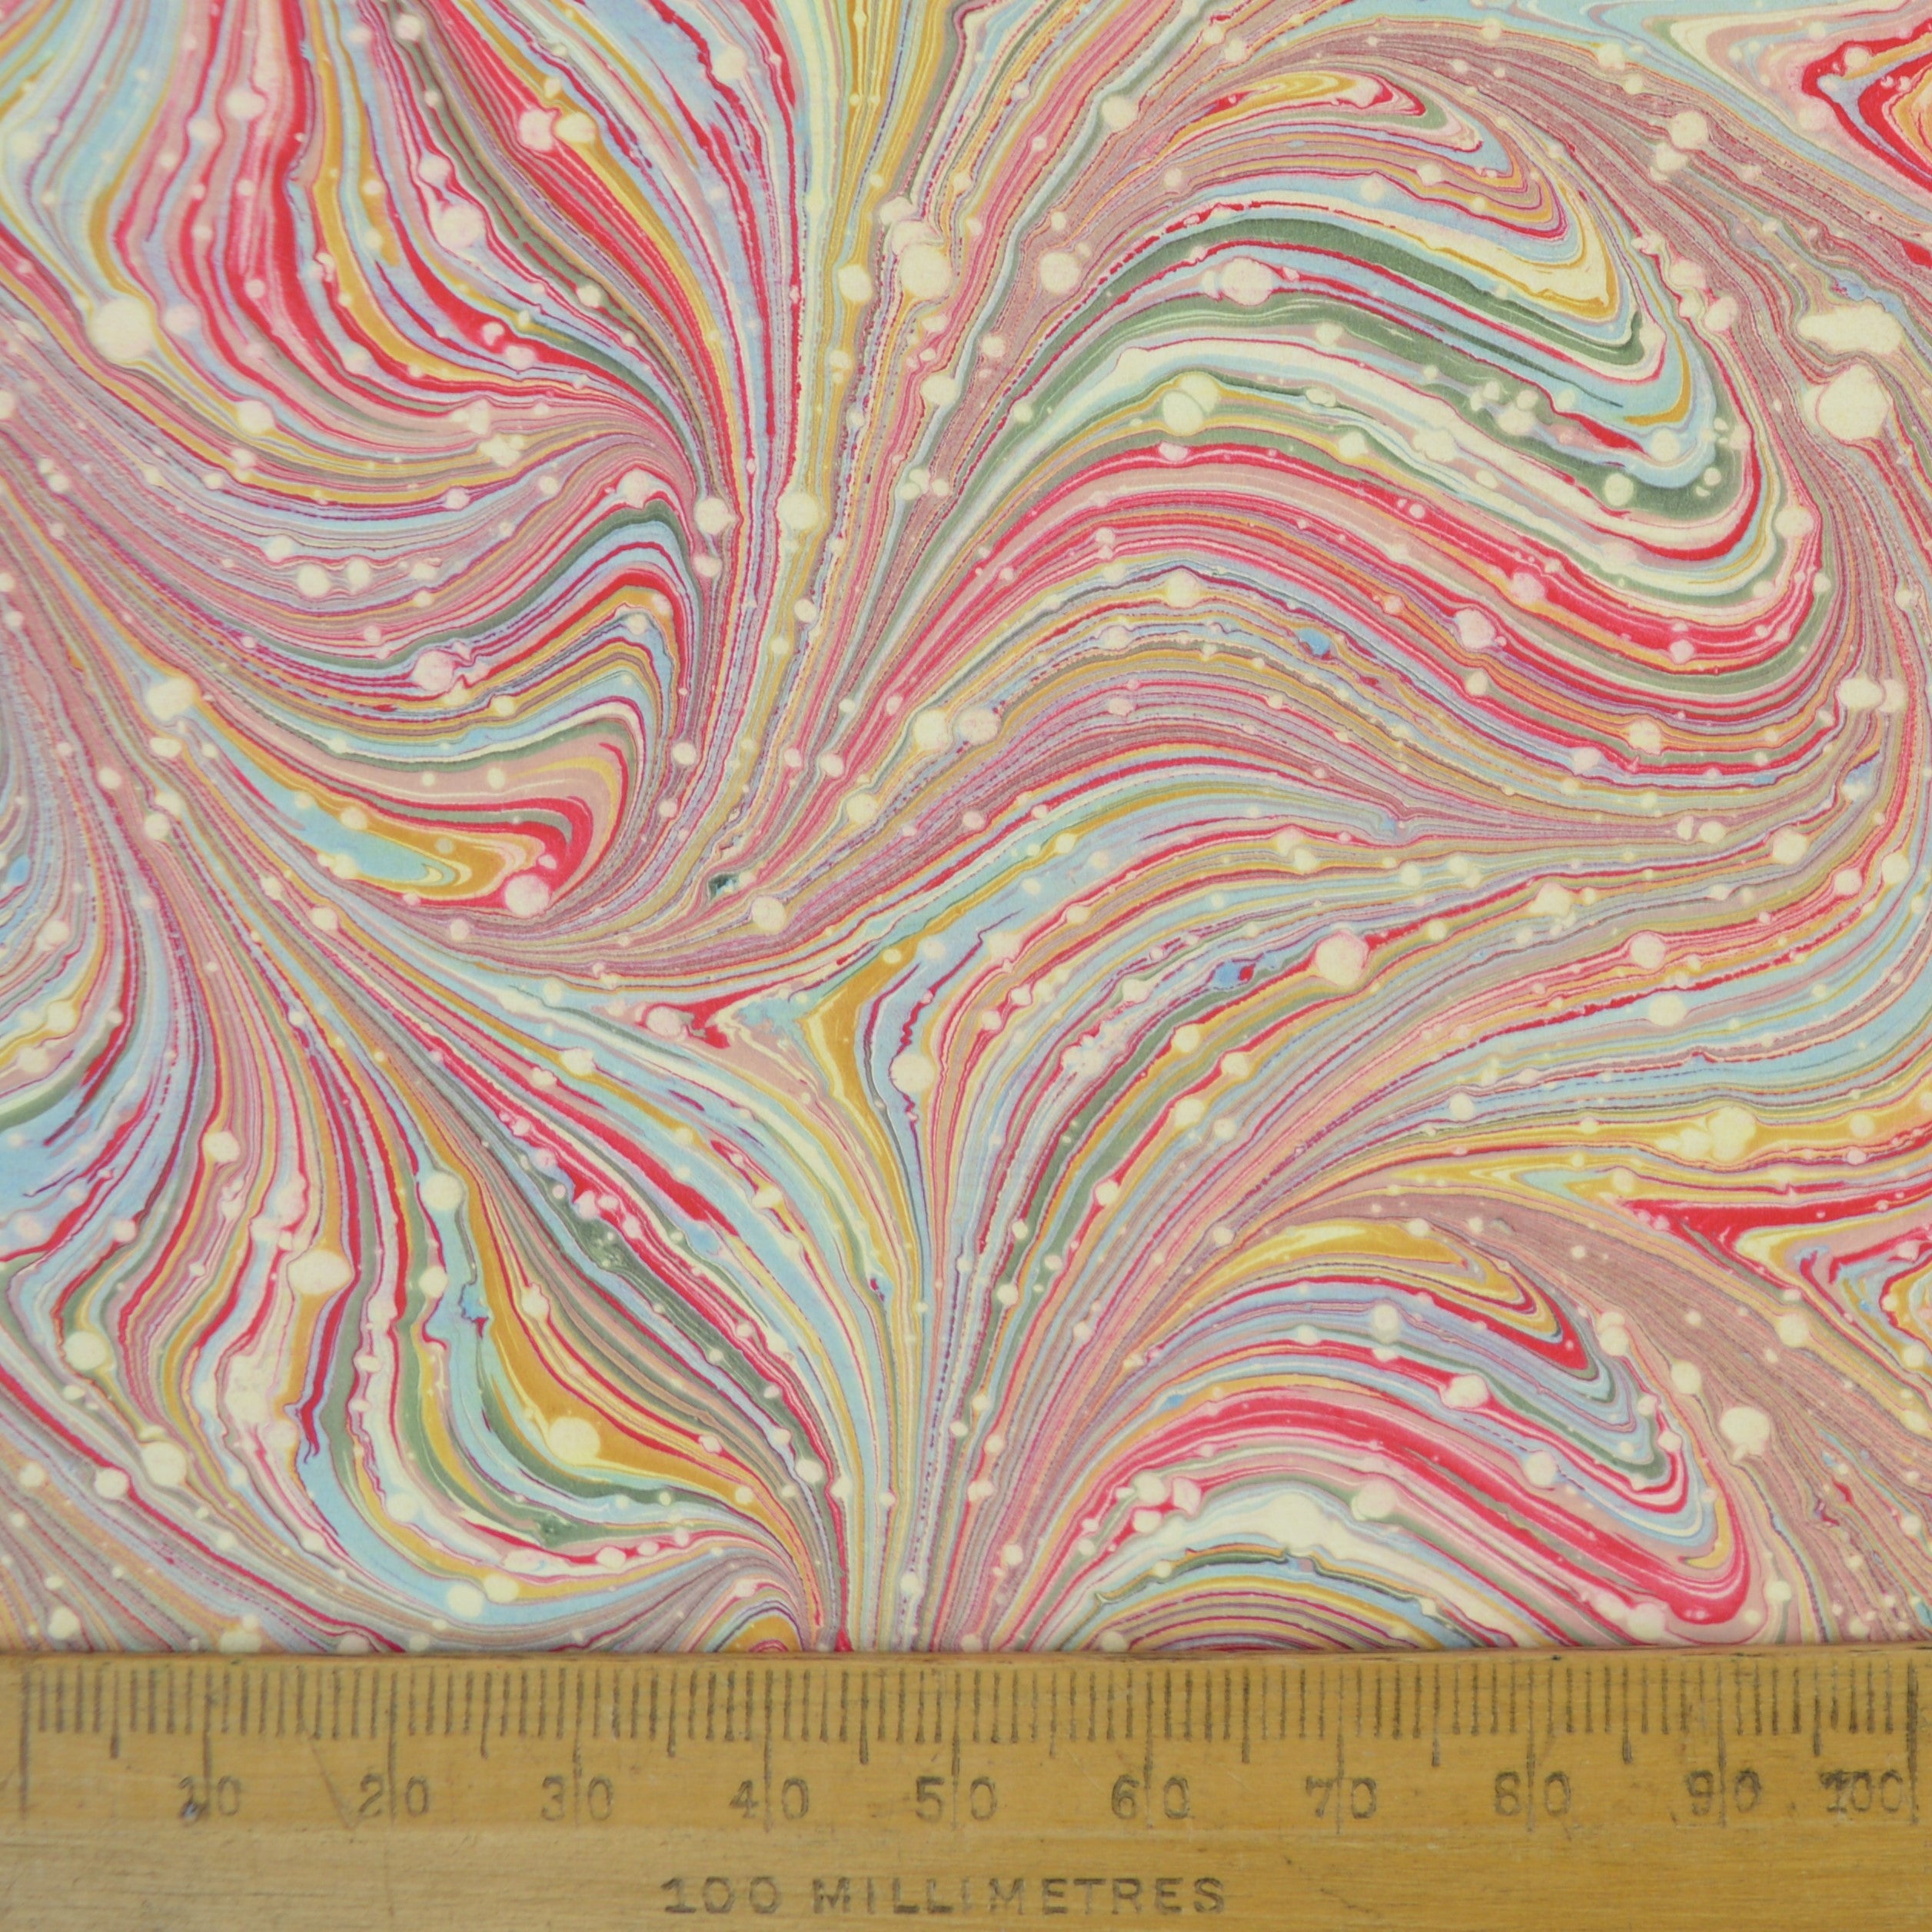 Munro and Kerr combed pink marble paper for a lampshade